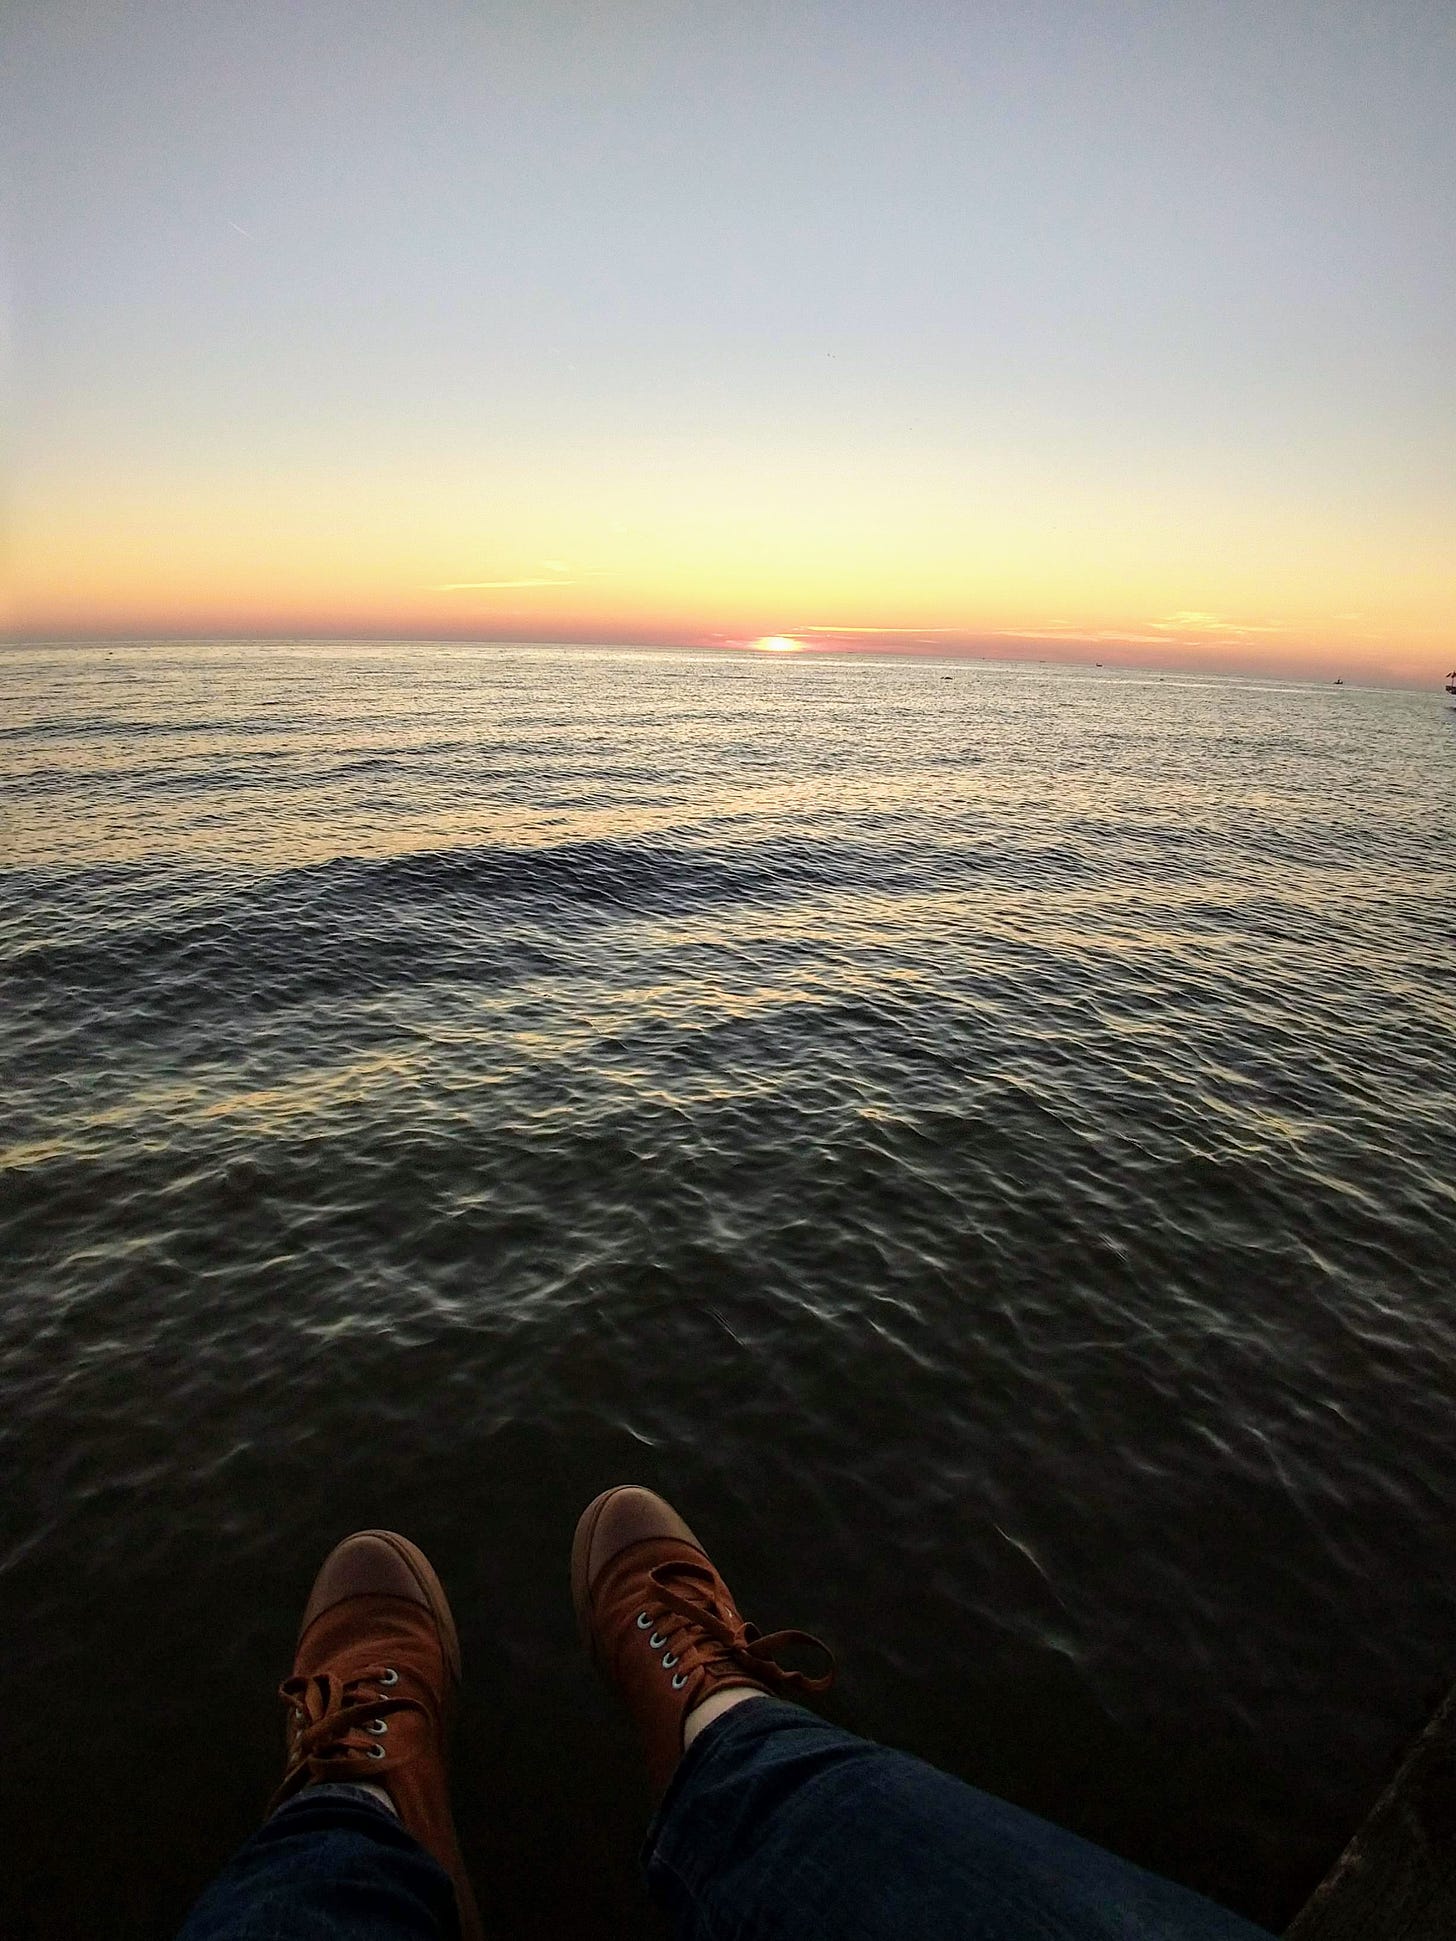 hanging my converse-style shoes over a wall I'm sitting on, the ocean in front of me as the sun dips below the horizon. While beautiful, it's a little sketchy that I'm sitting on the edge. 